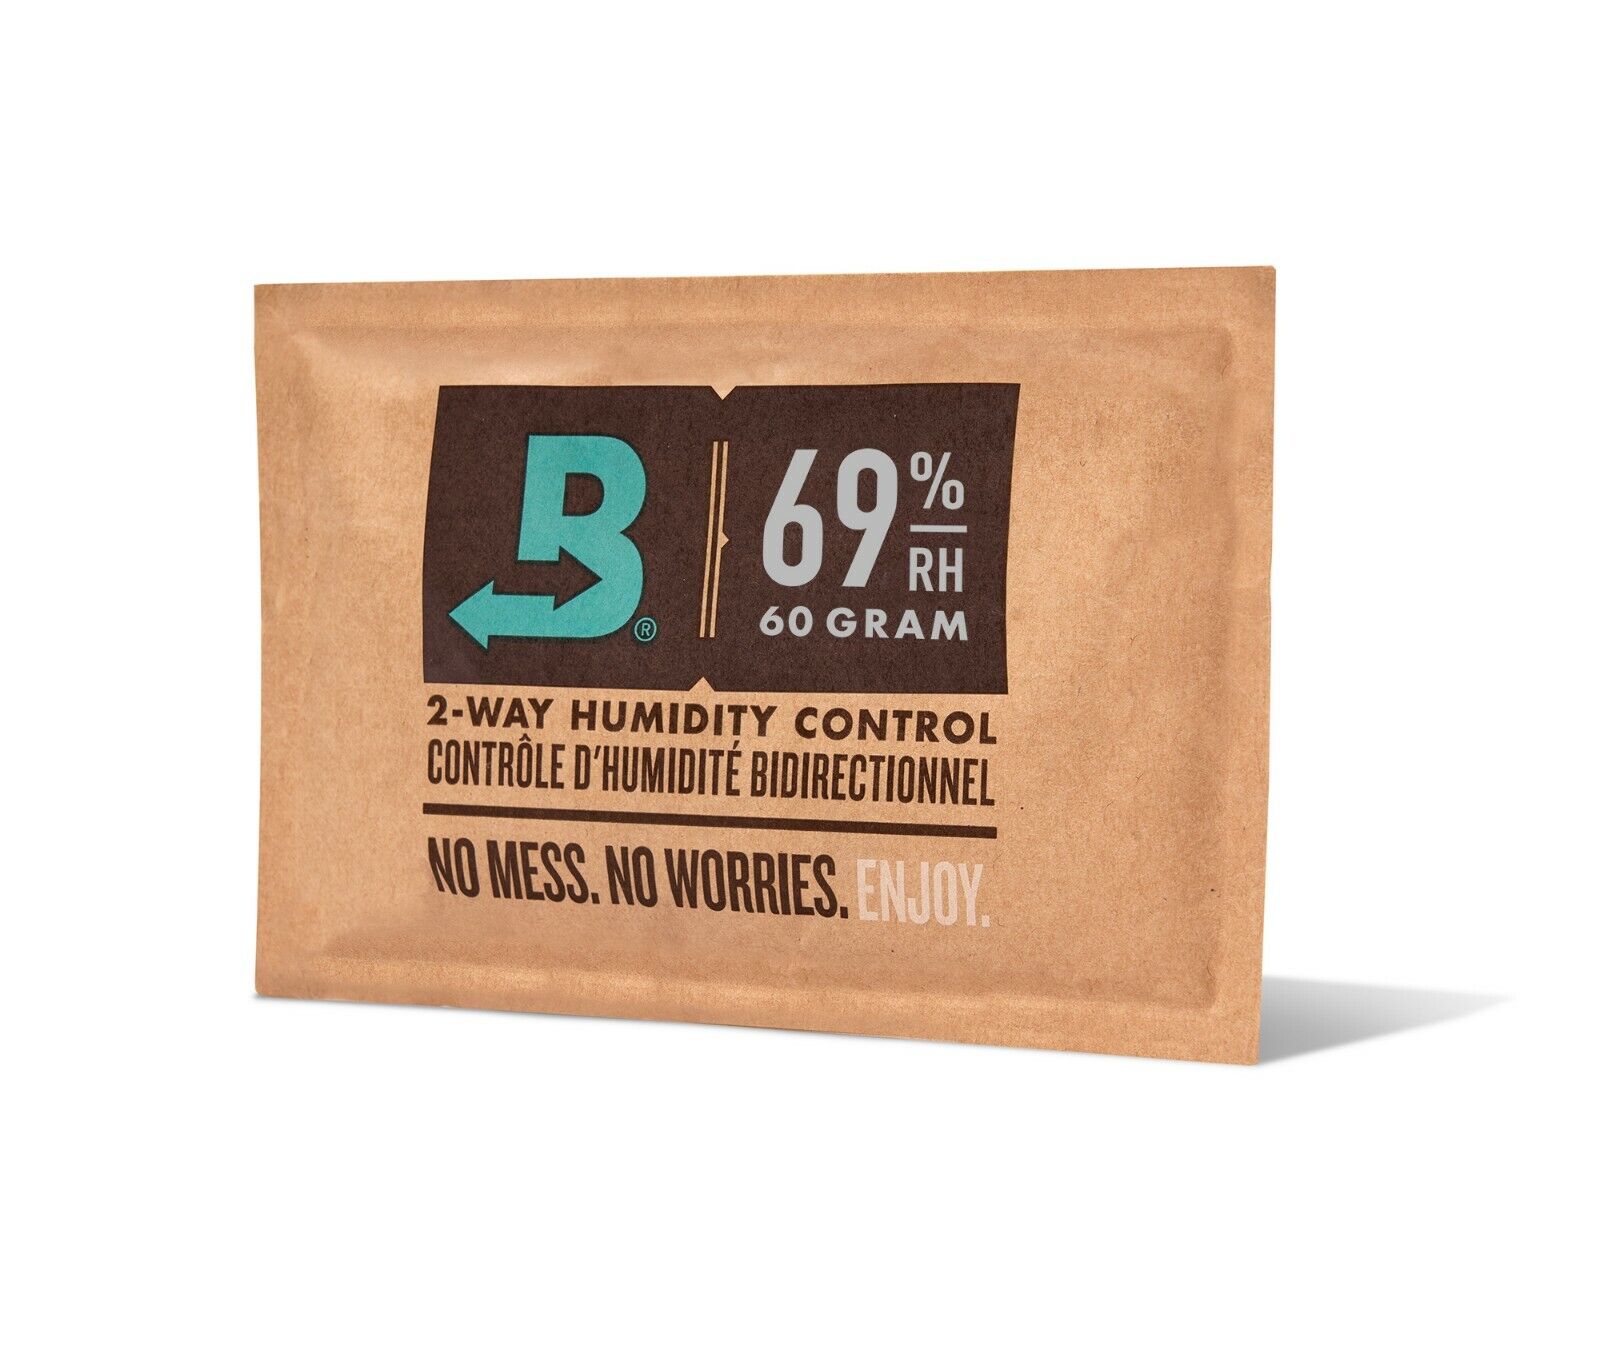 Boveda 69% RH 2-Way Humidity Control - Size 60 for Every 25 Cigars